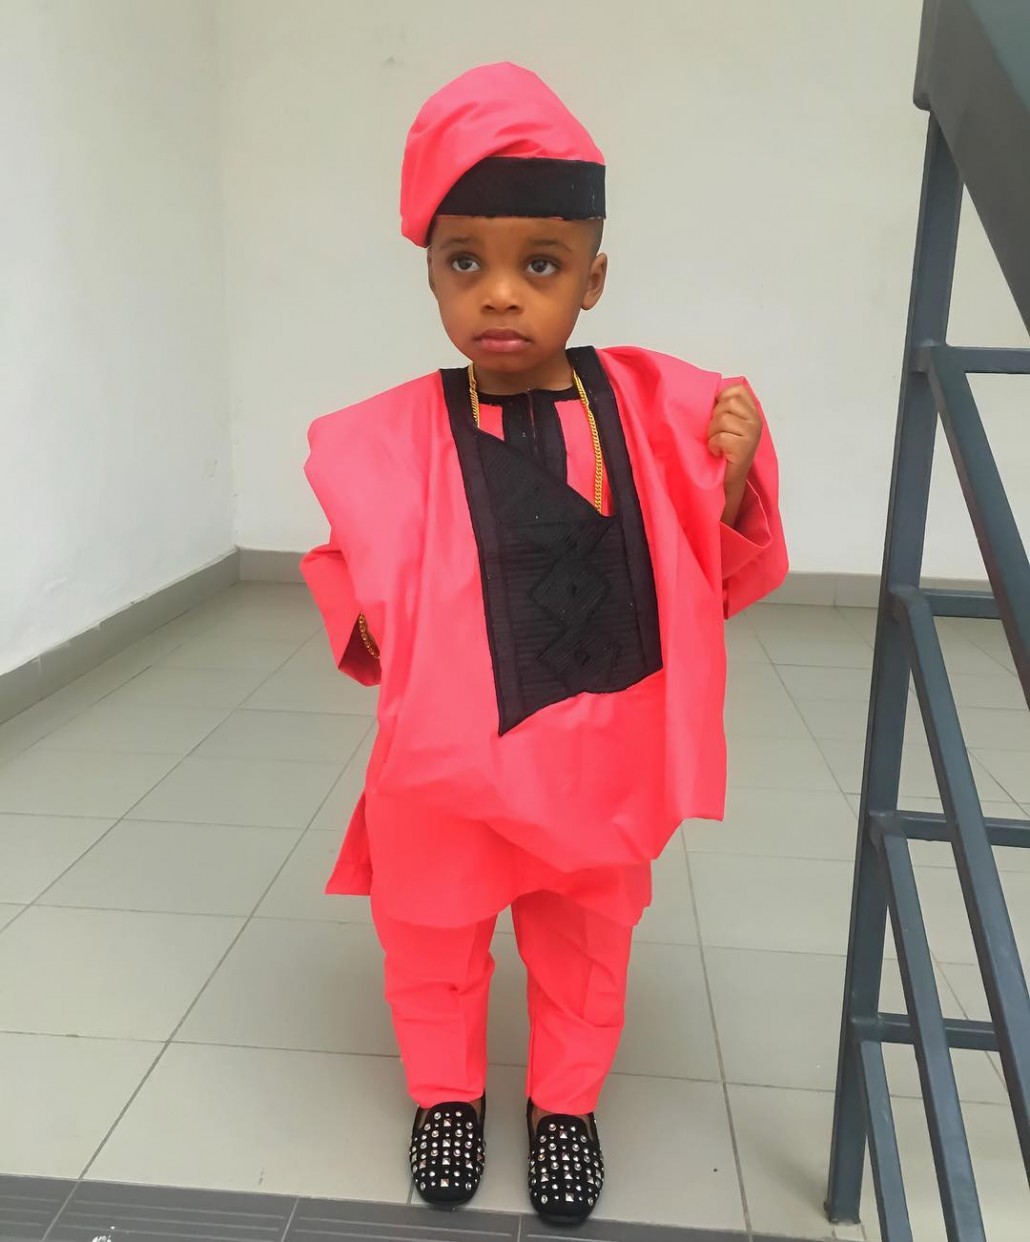 Awesome Agbada Styles For Children amillionstyles.com @kemsegsy